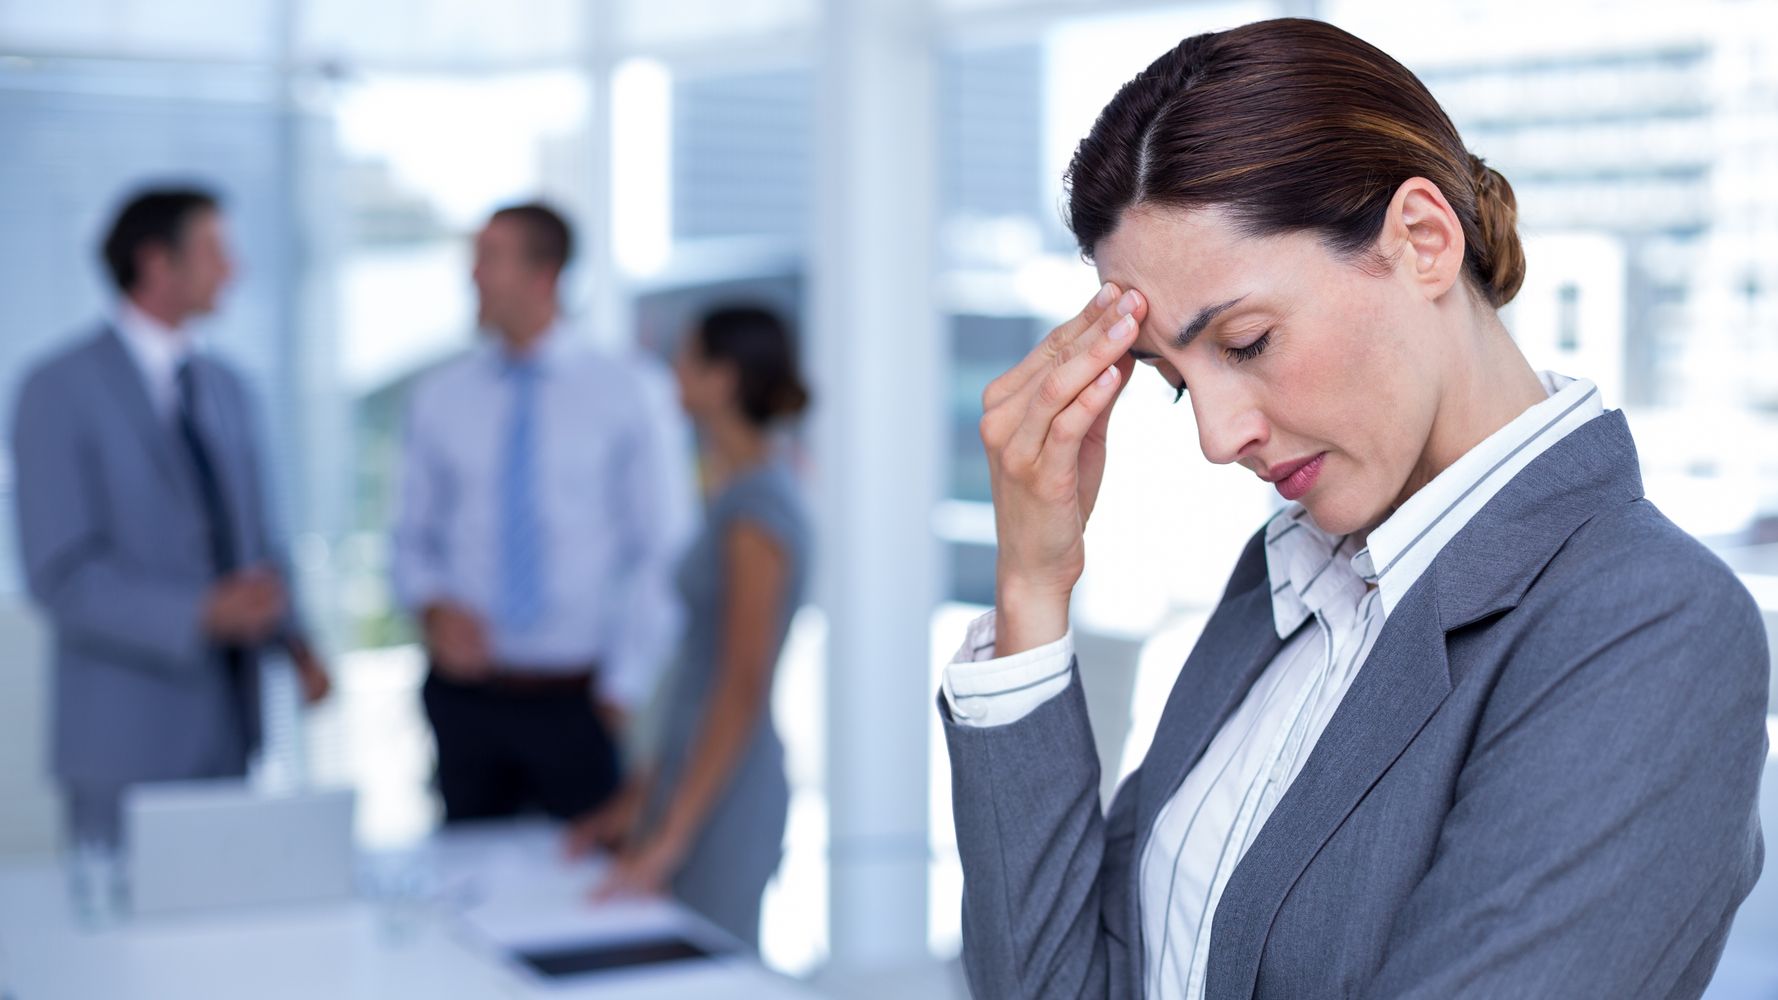 What is chronic stress? Hint: It's not the same as regular stress